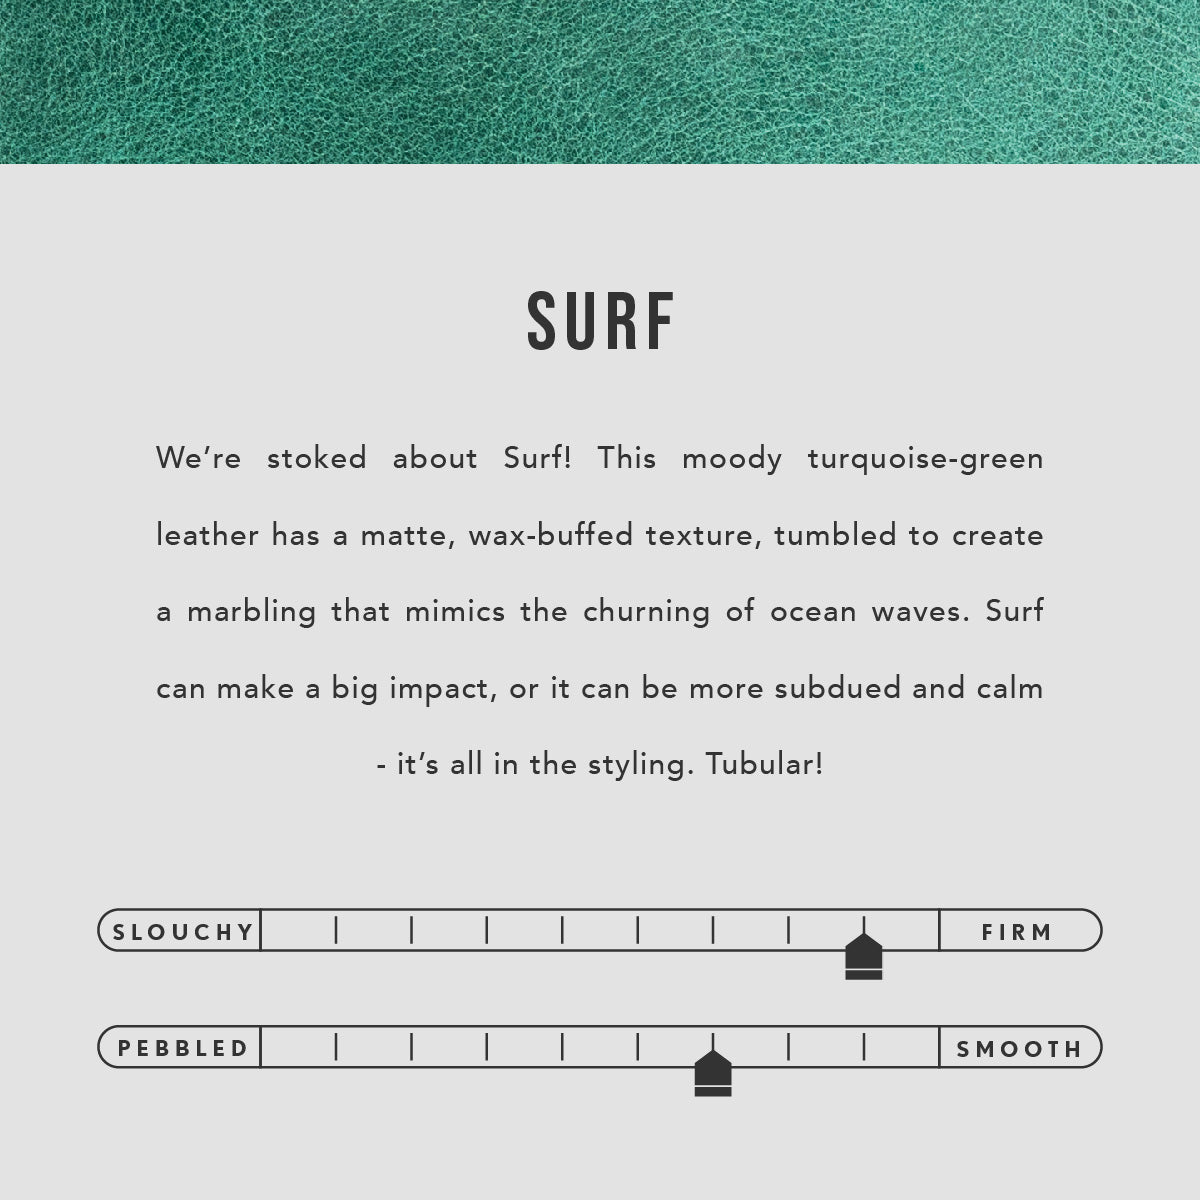 Surf | infographic